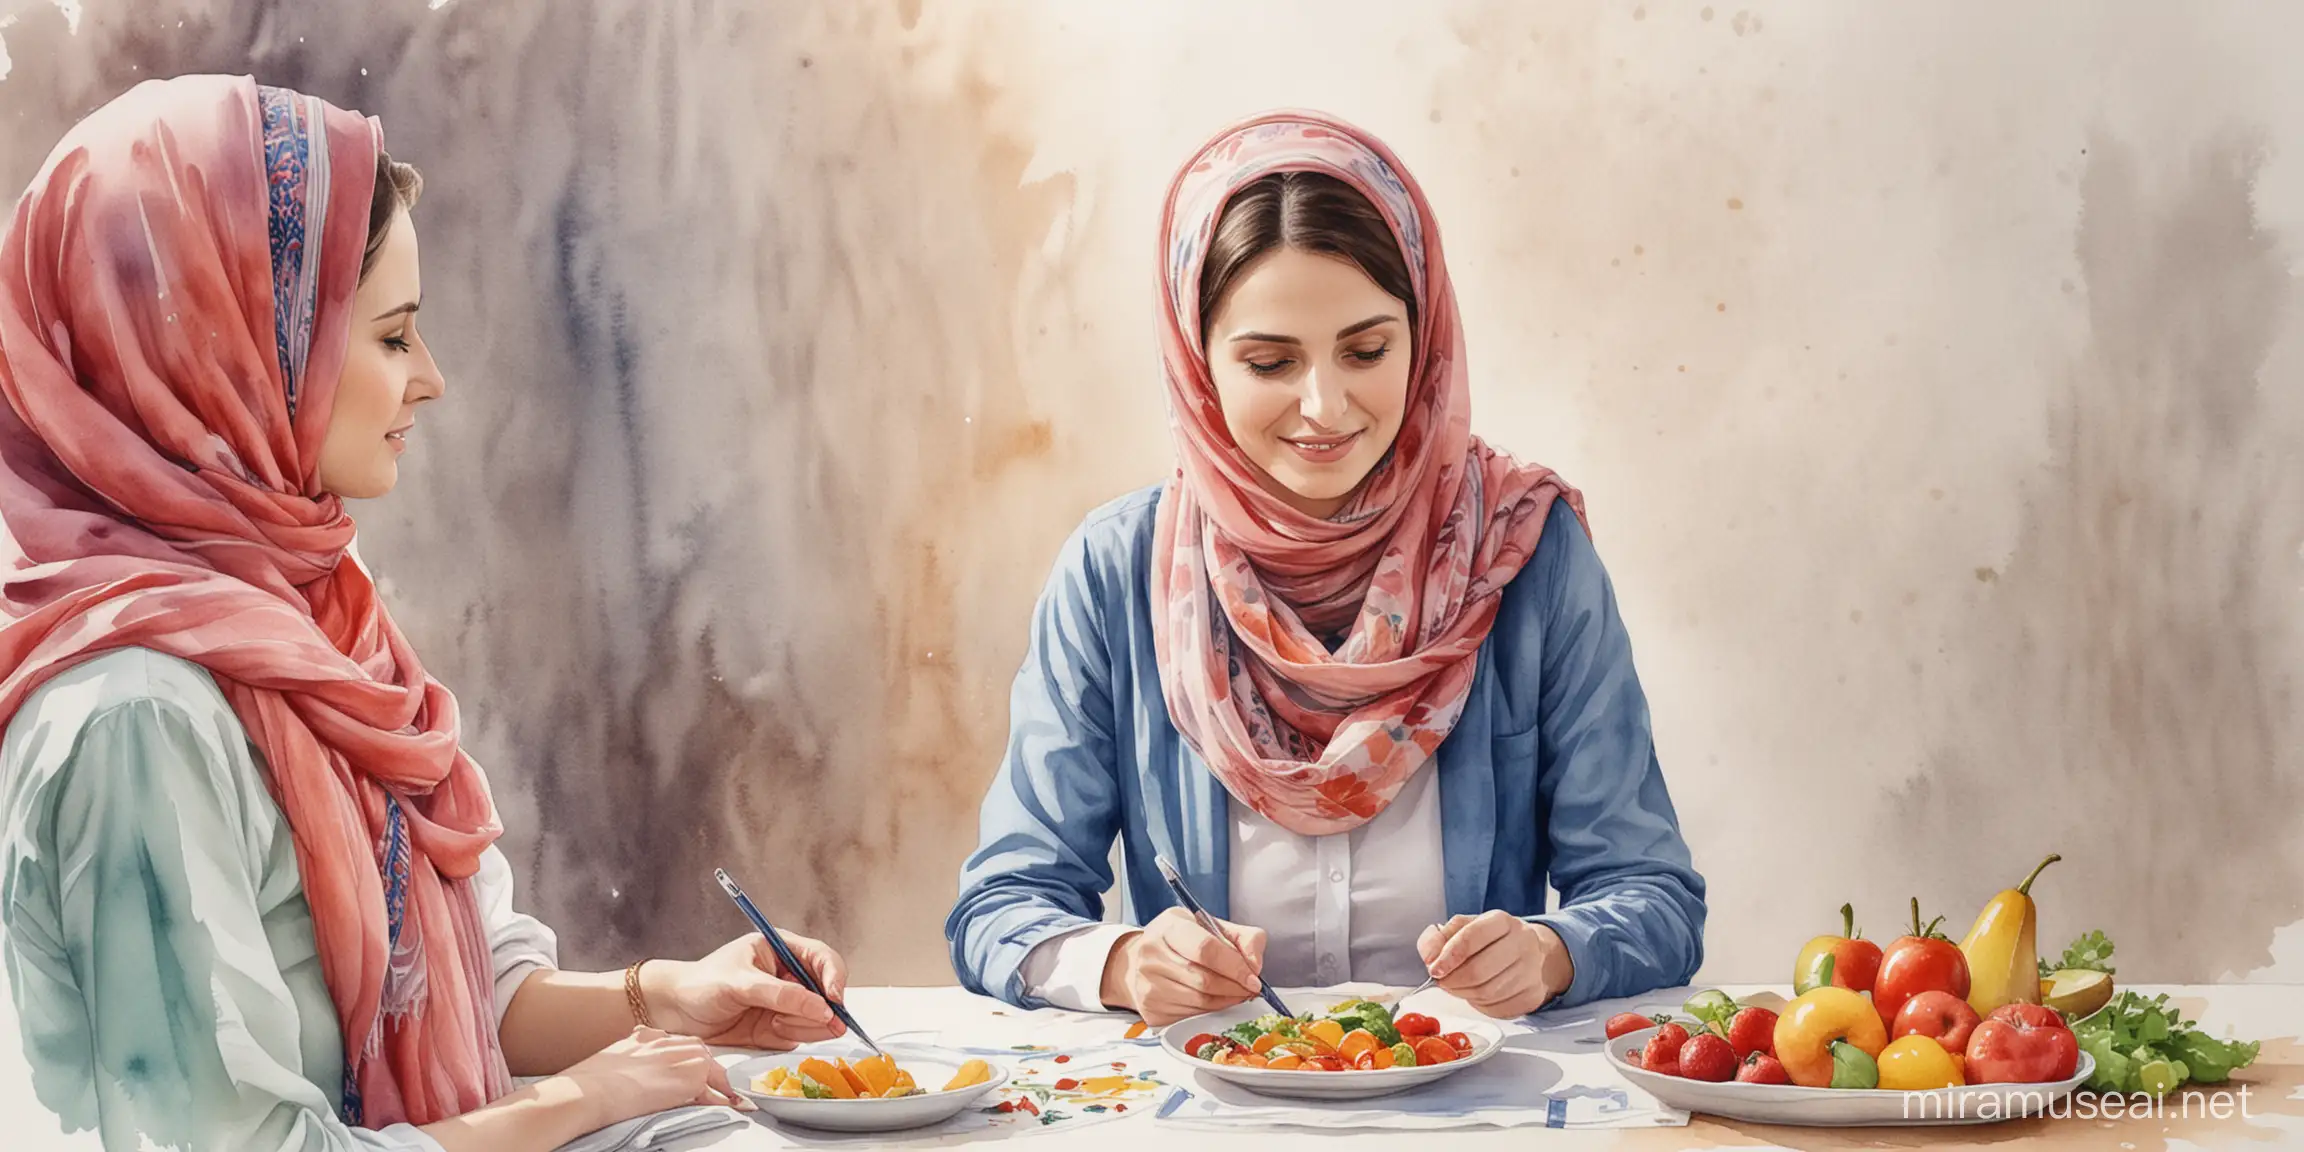 Watercolor Consulting Session with Nutritionist Featuring Woman in Muslim Scarf